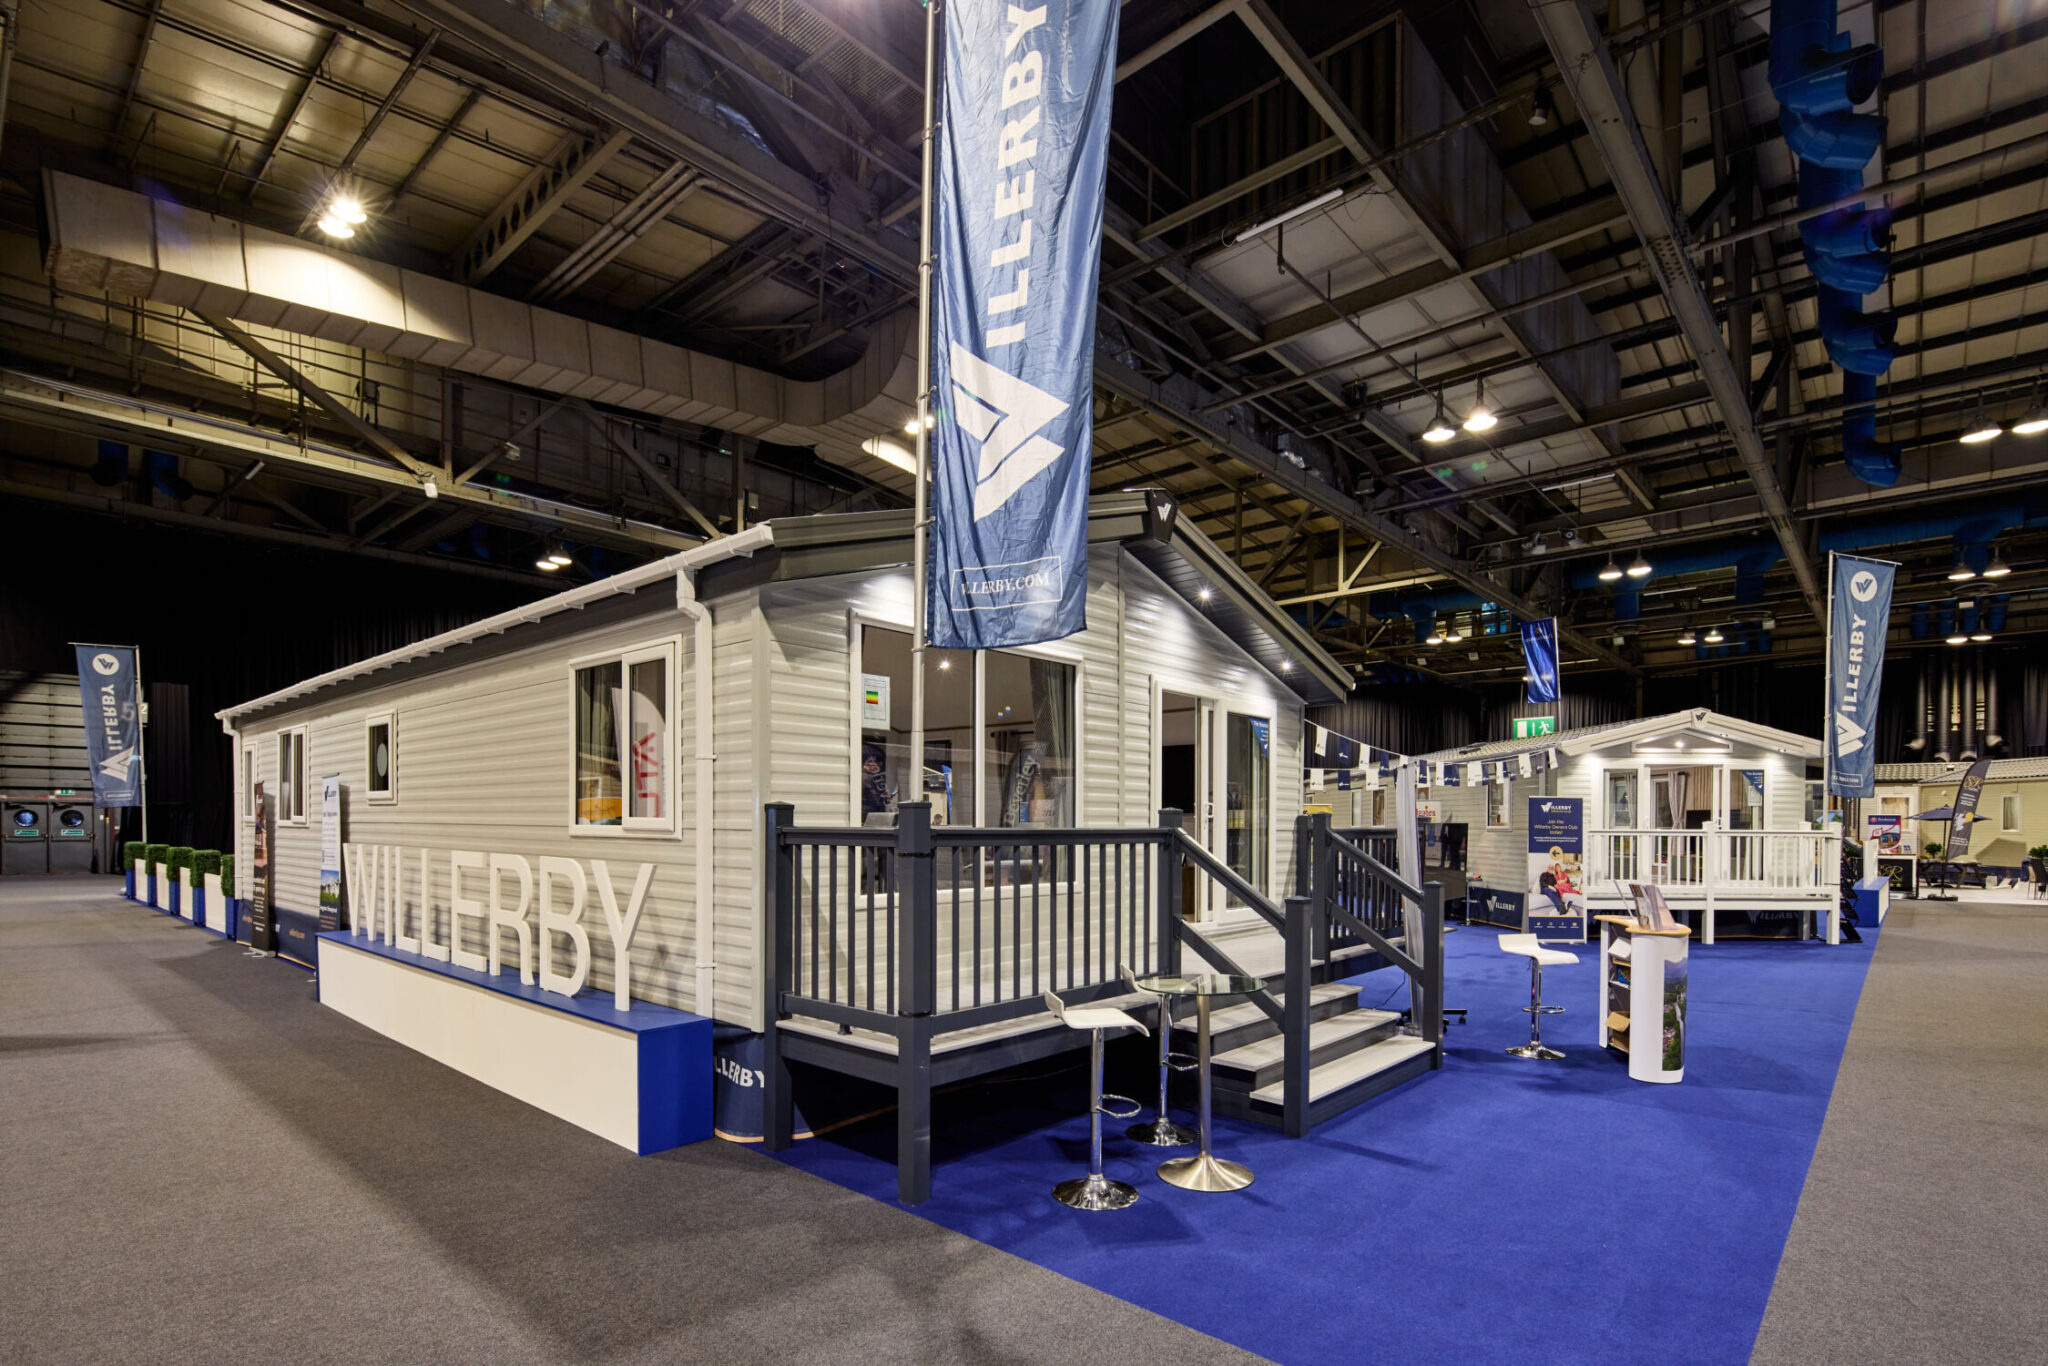 New Willerby Boston external picture from holiday show 2024